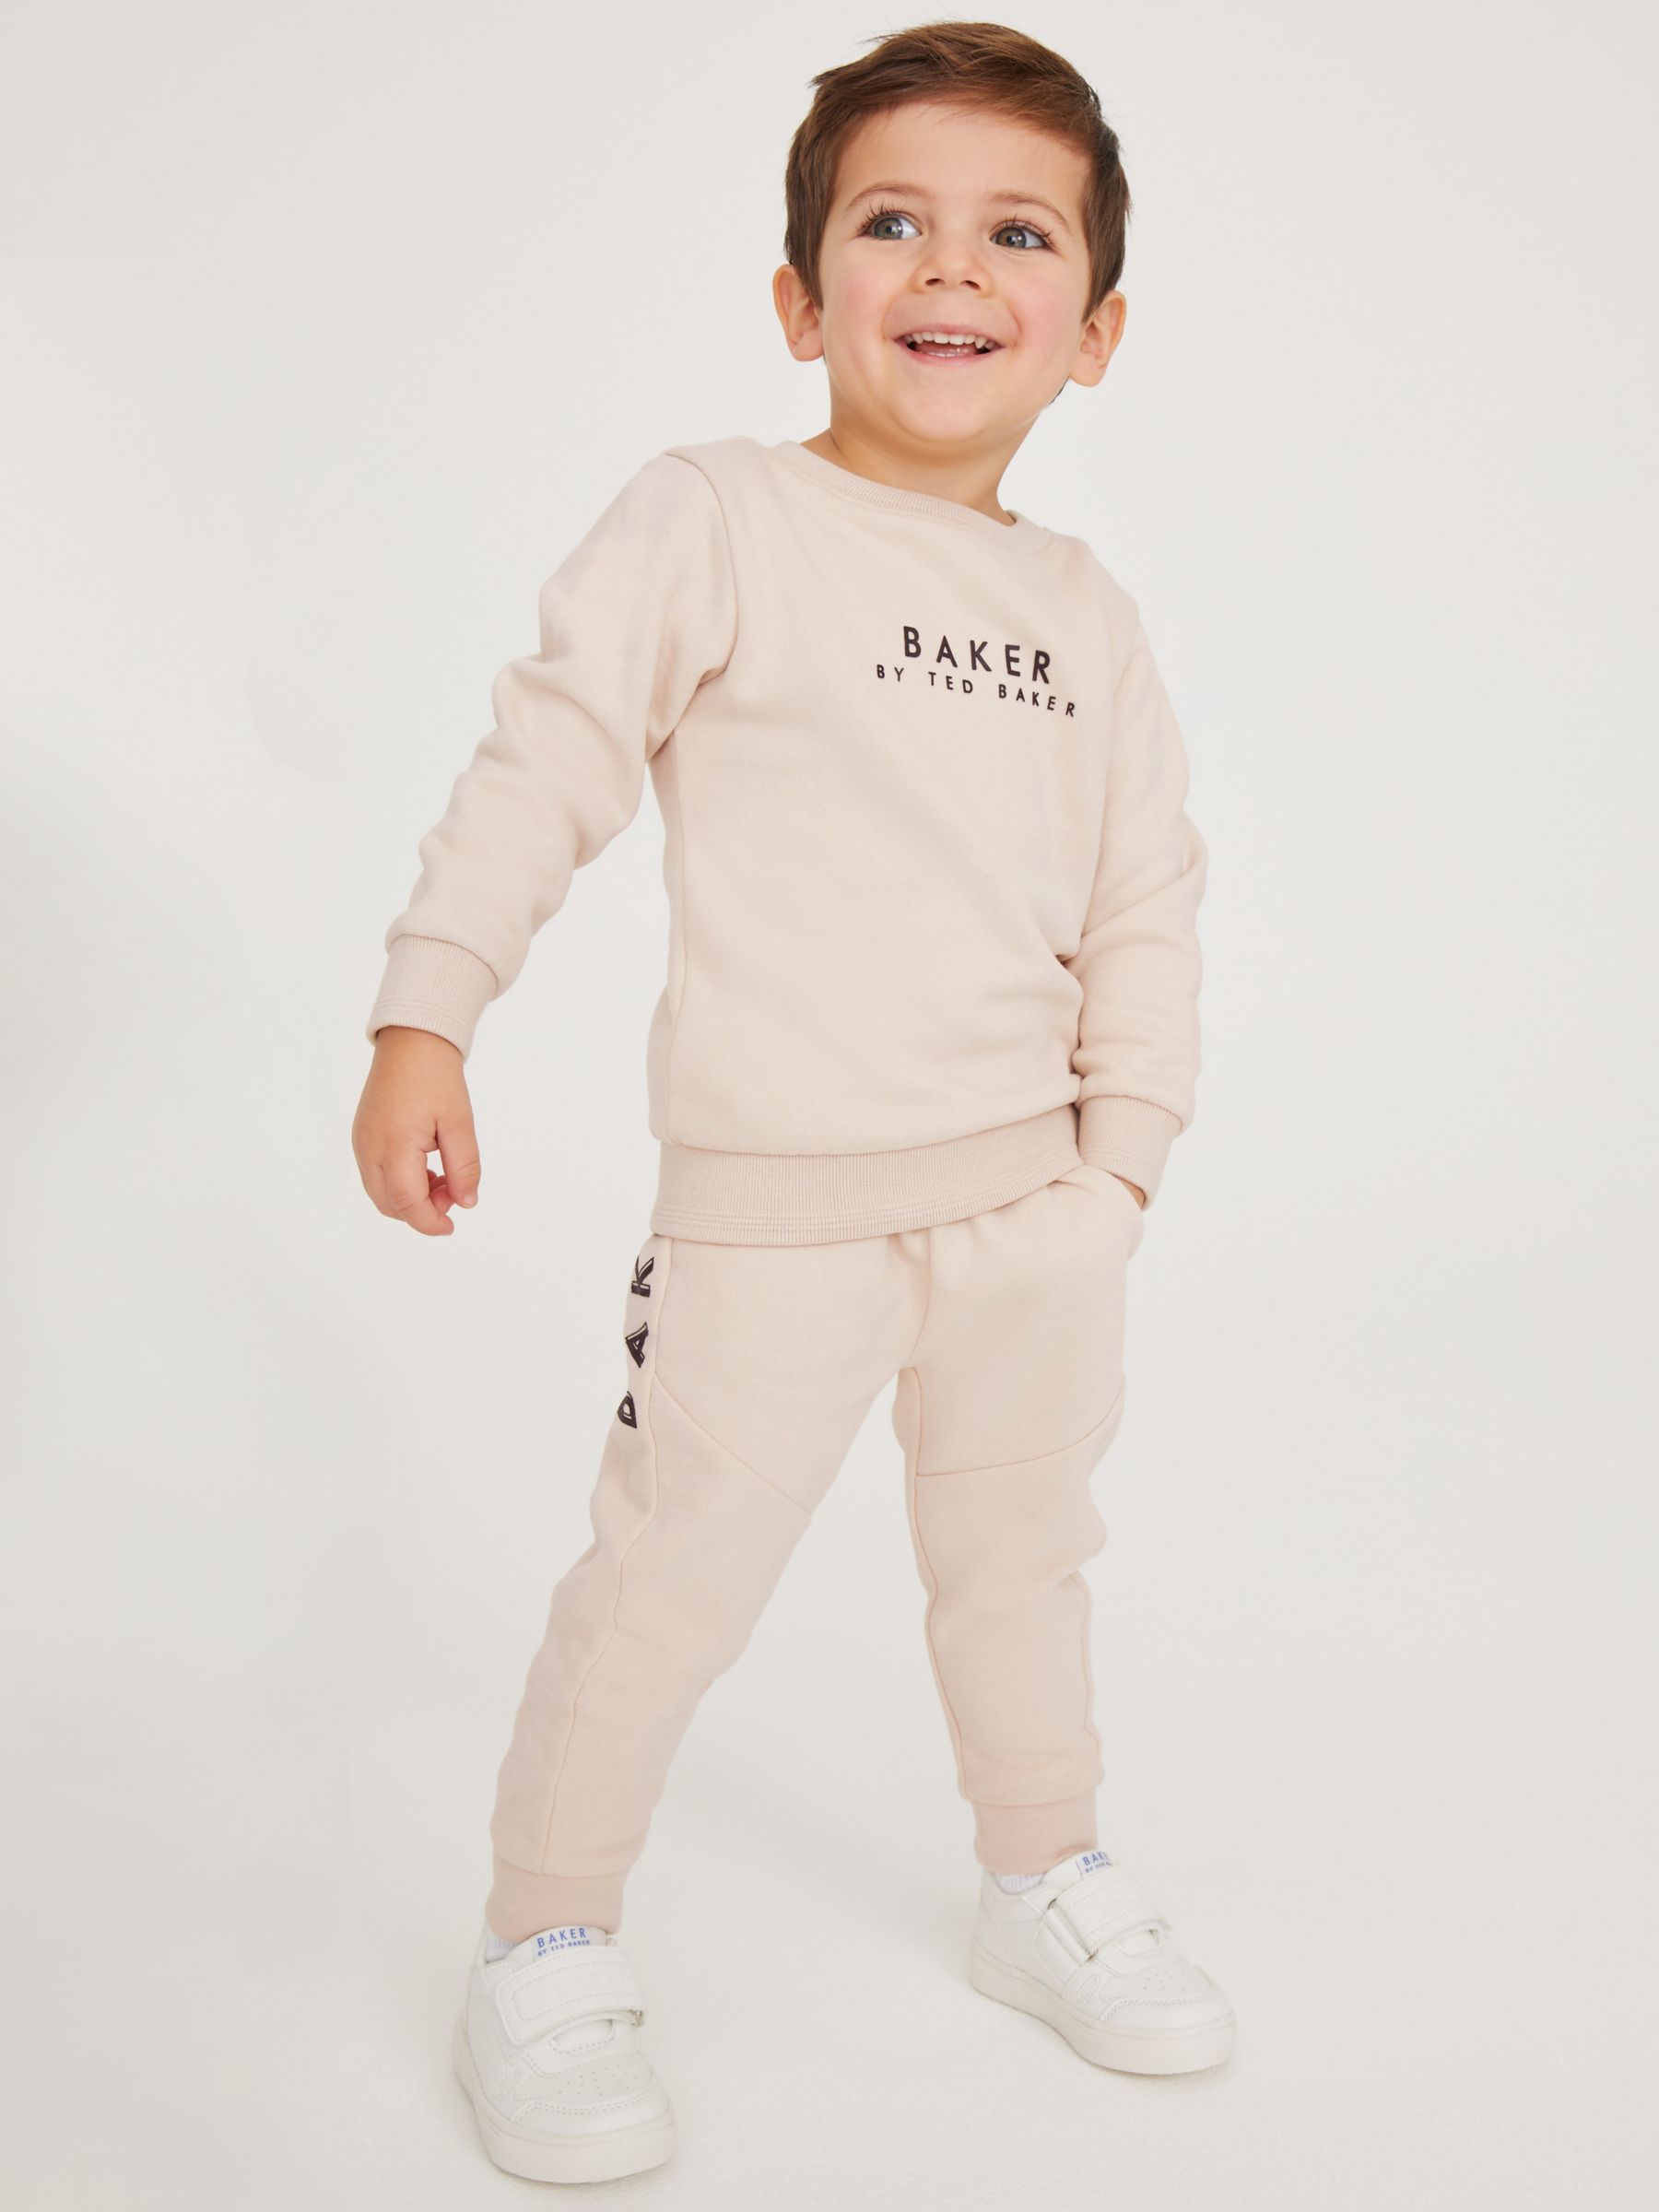 Essentials - Tracksuit Bottoms for Boys 2-7